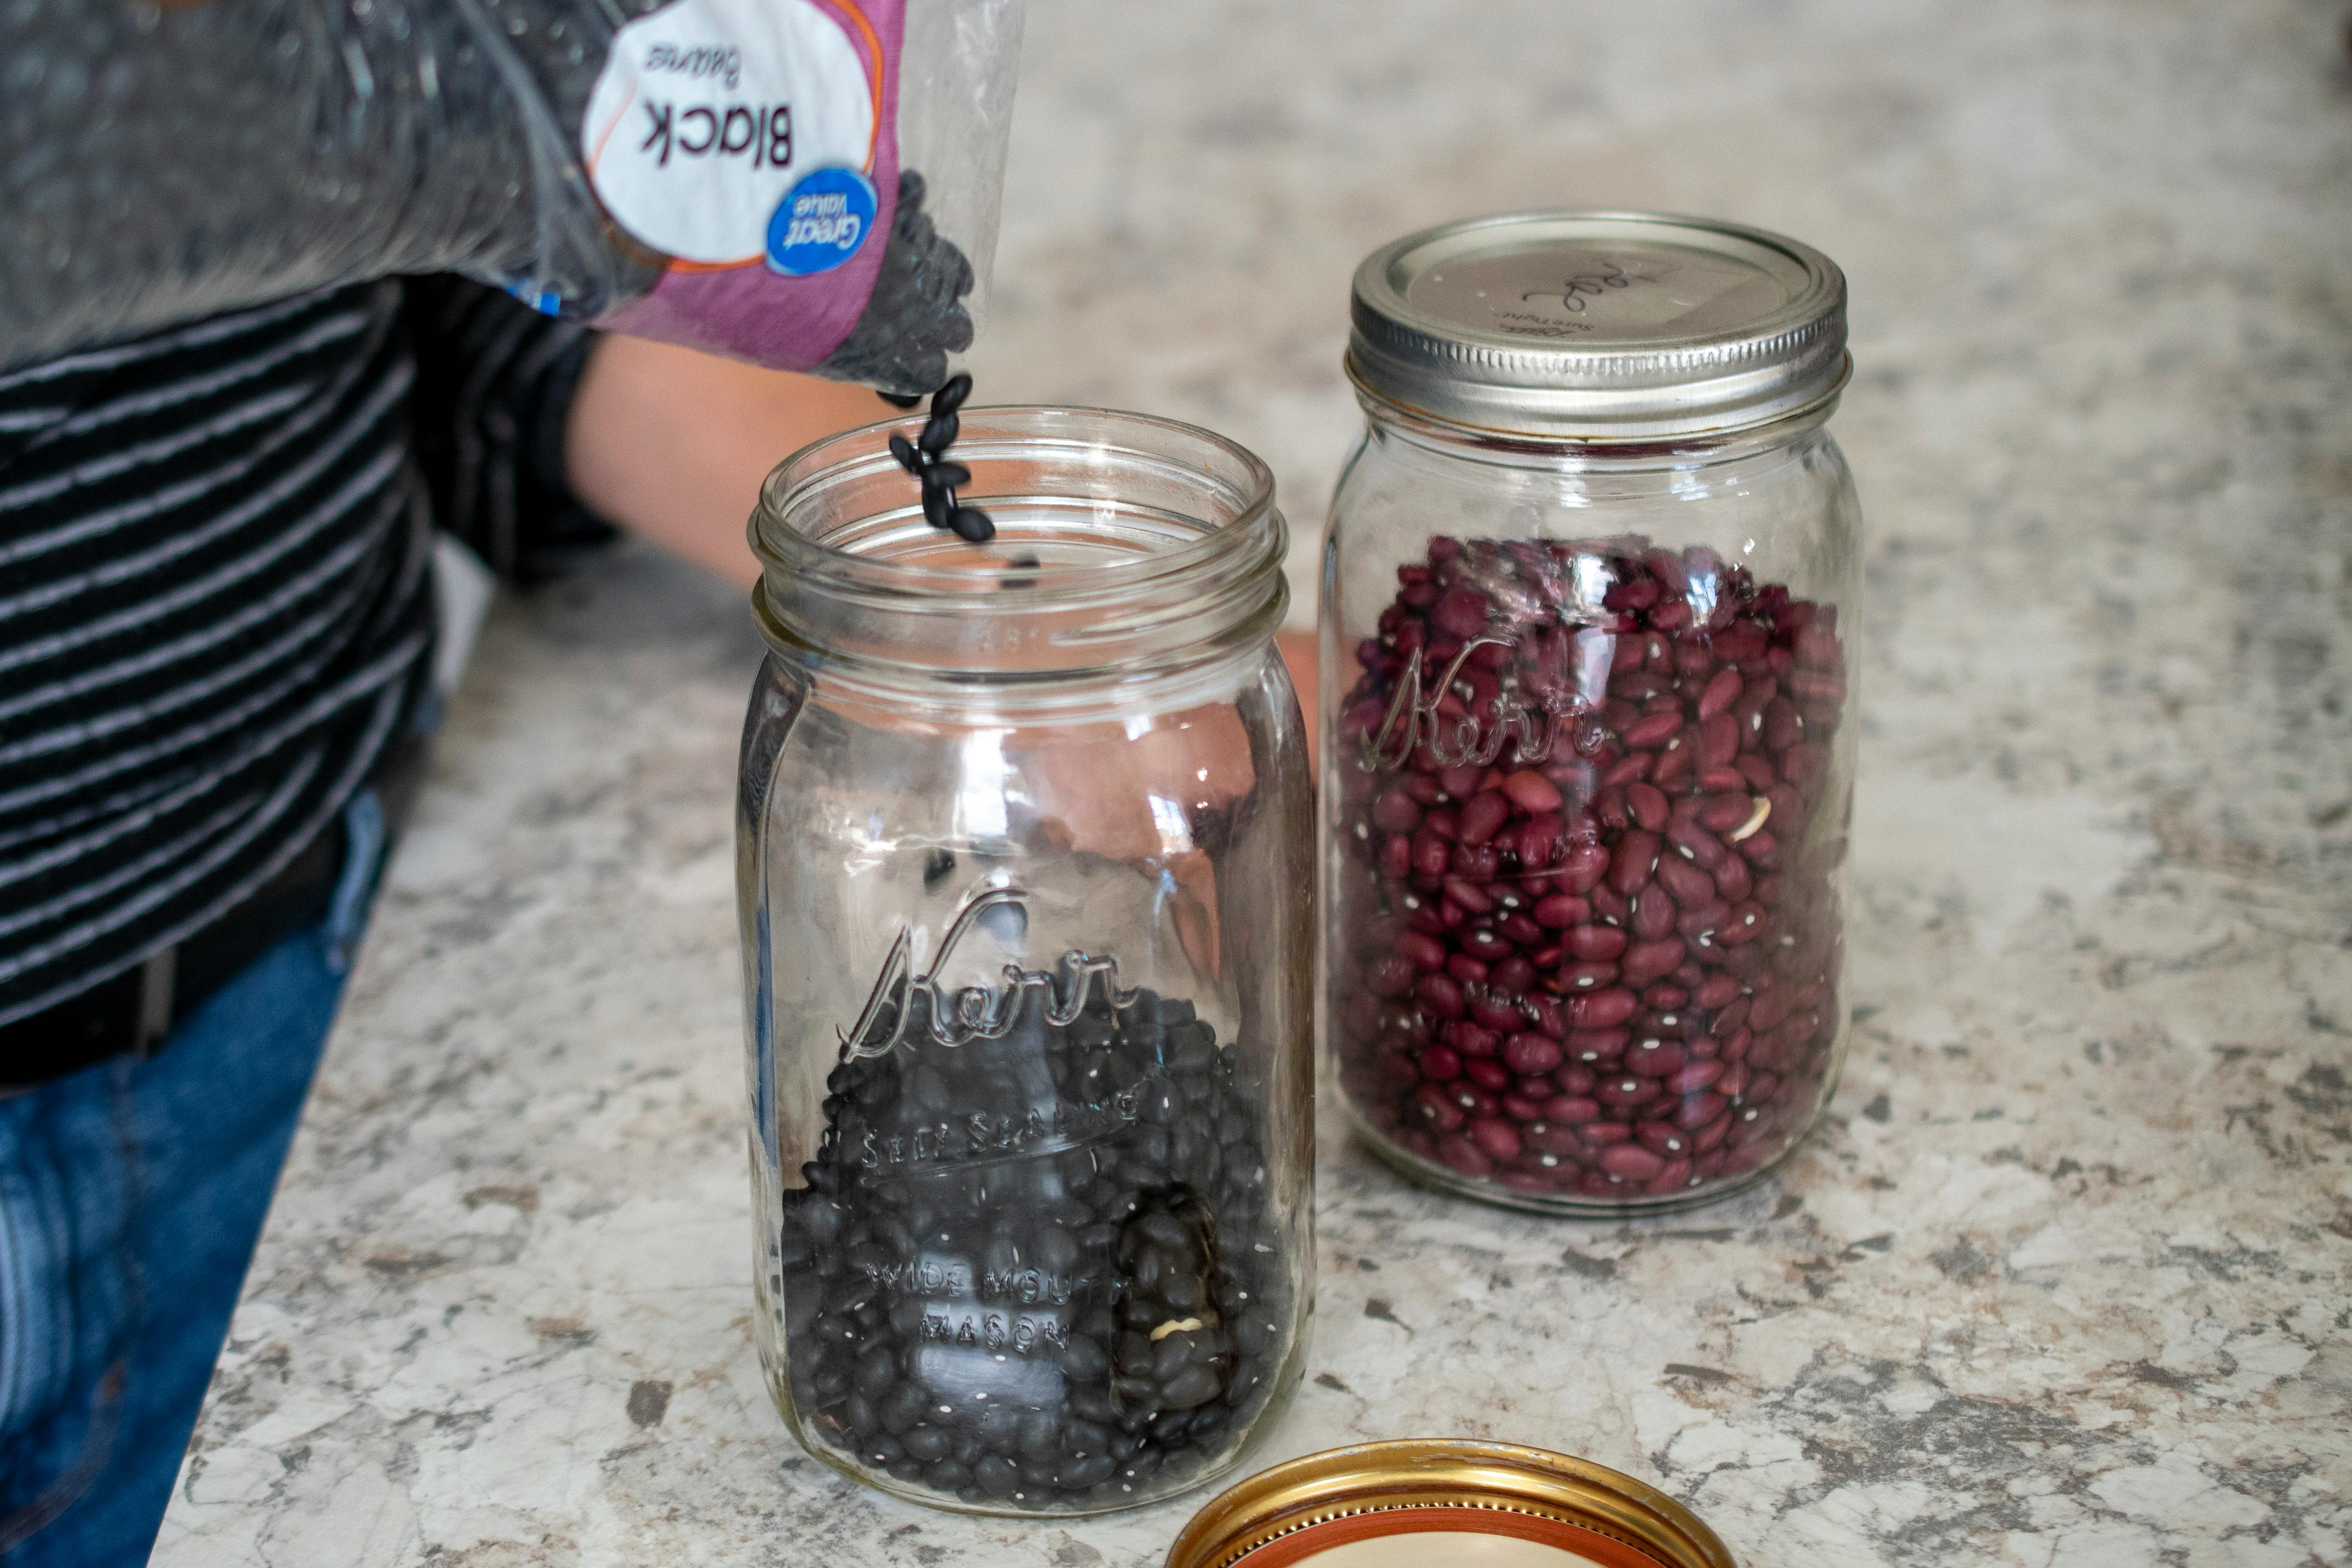 The person pouring dried beans into a mason jar